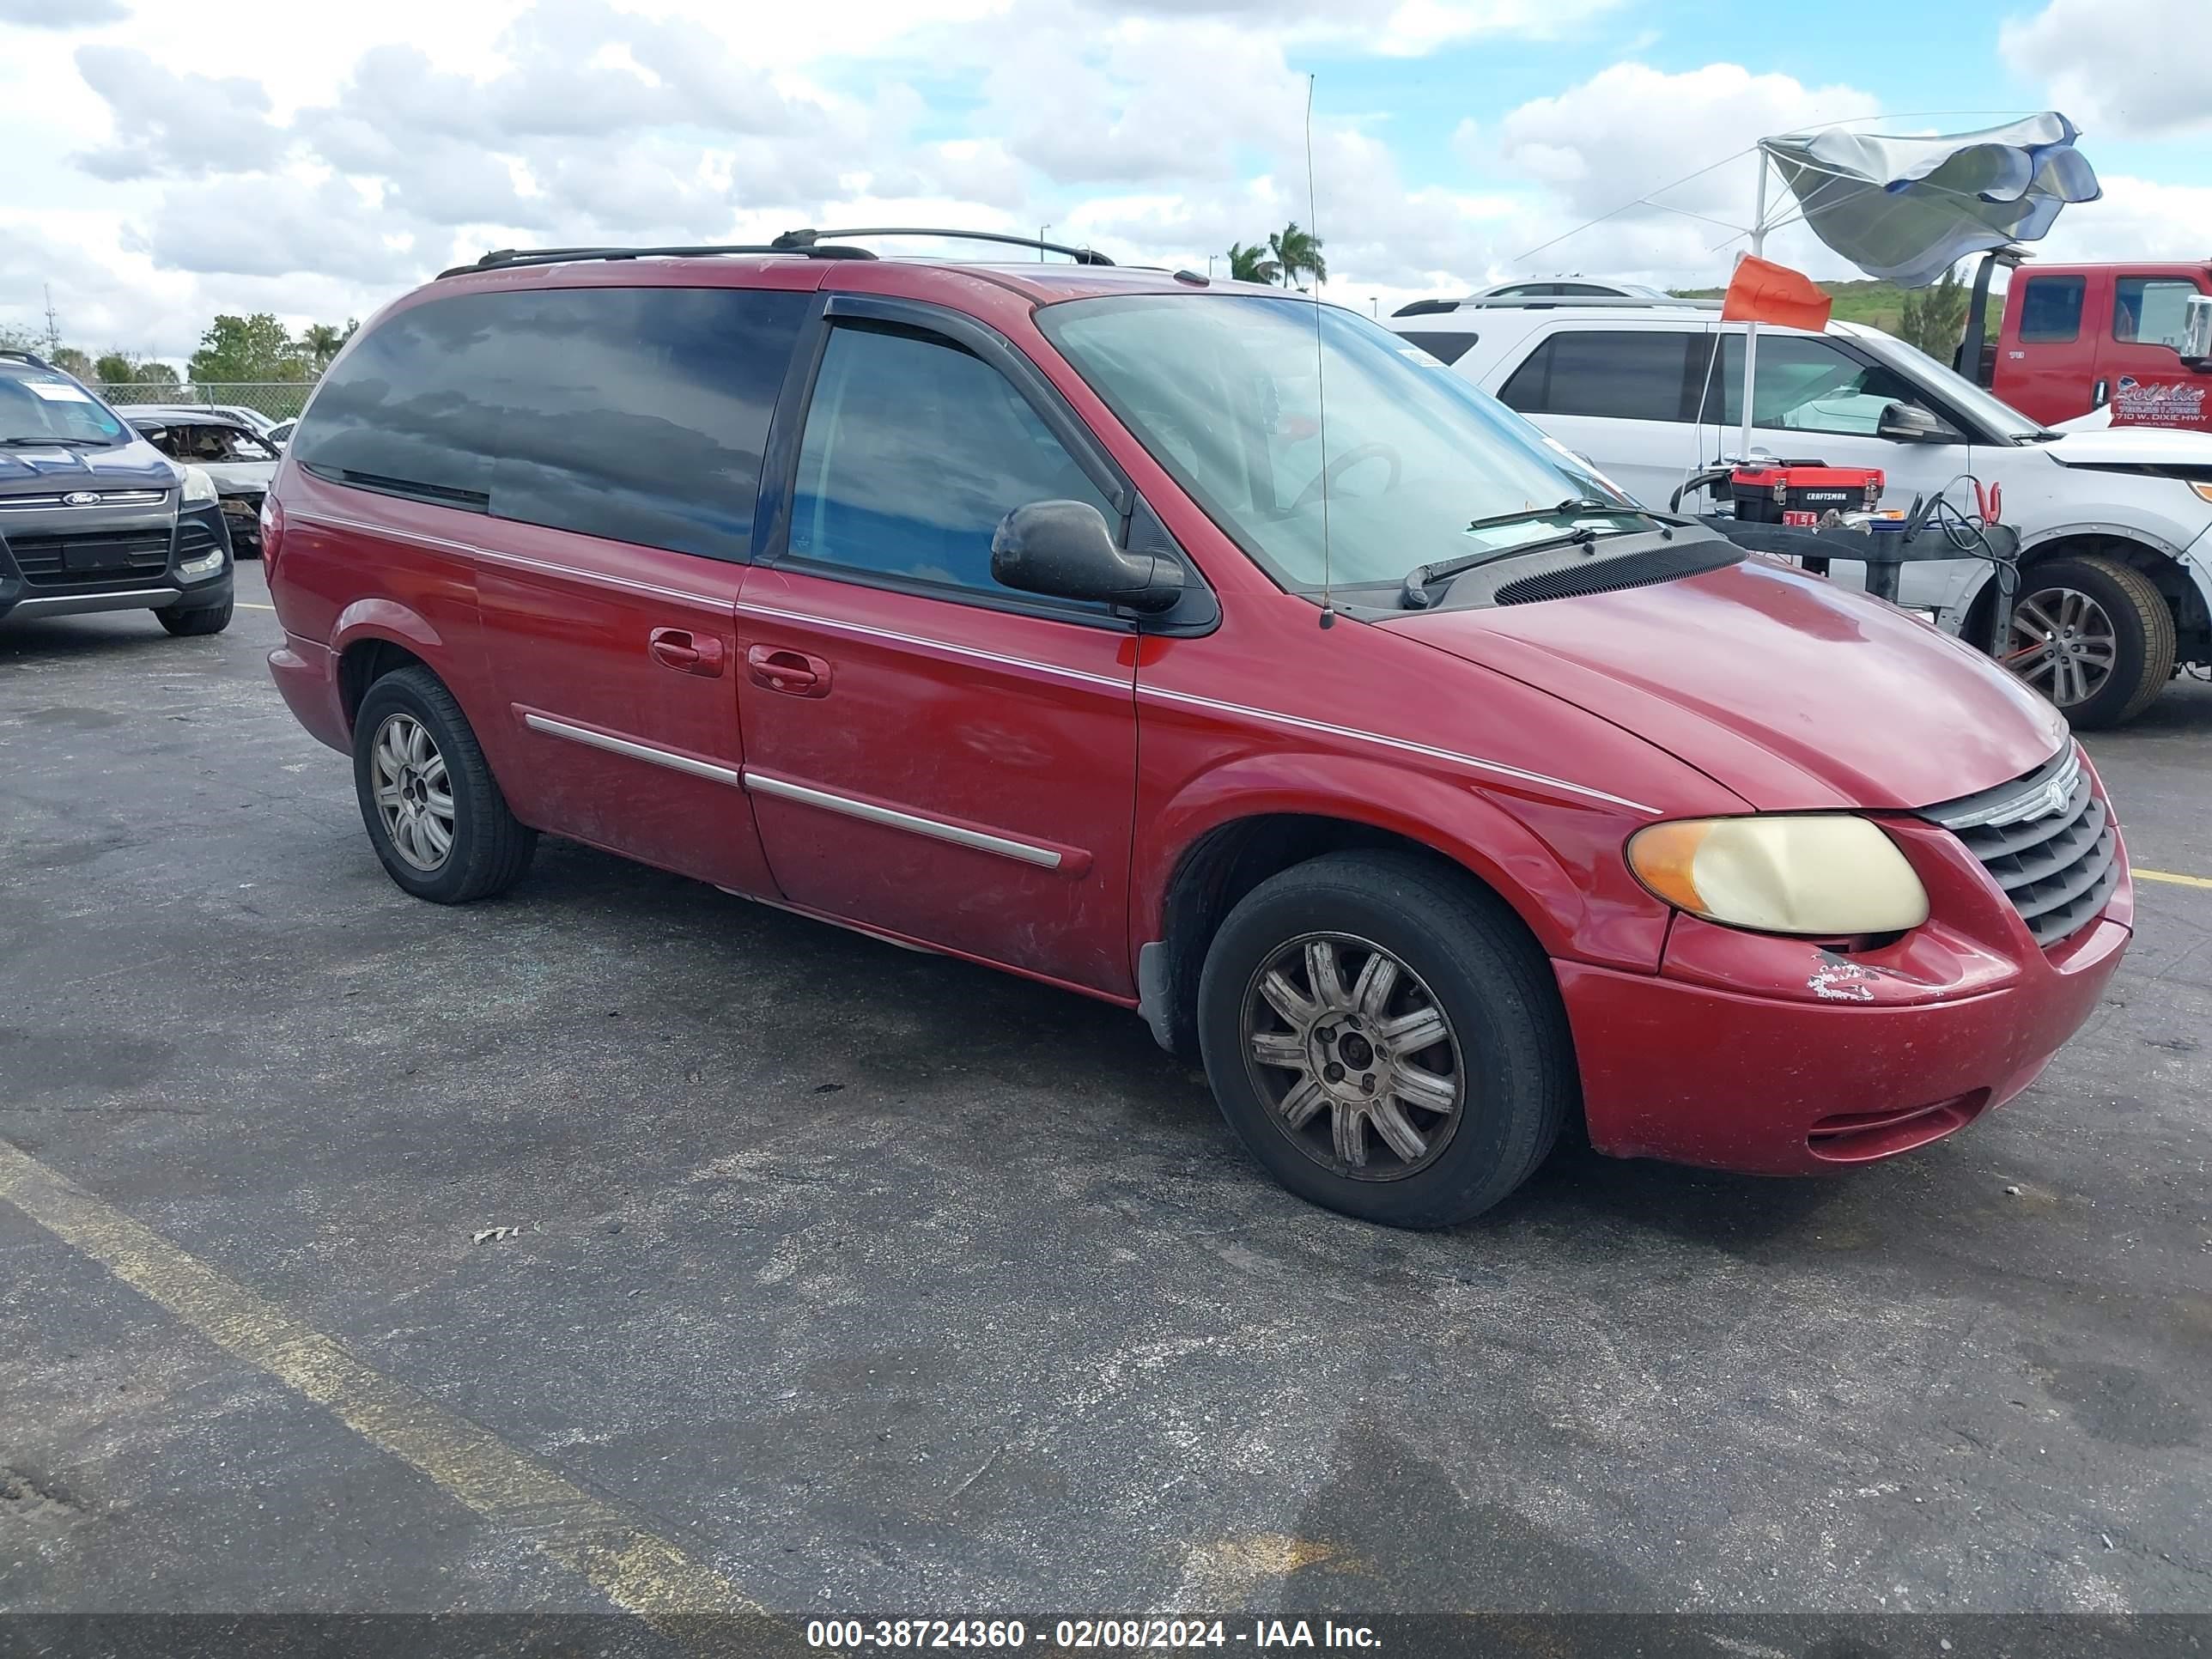 vin: 2A4GP54L86R893281 2A4GP54L86R893281 2006 chrysler town & country 3800 for Sale in 33332, 20499 Stirling Road, Southwest Ranch, Florida, USA